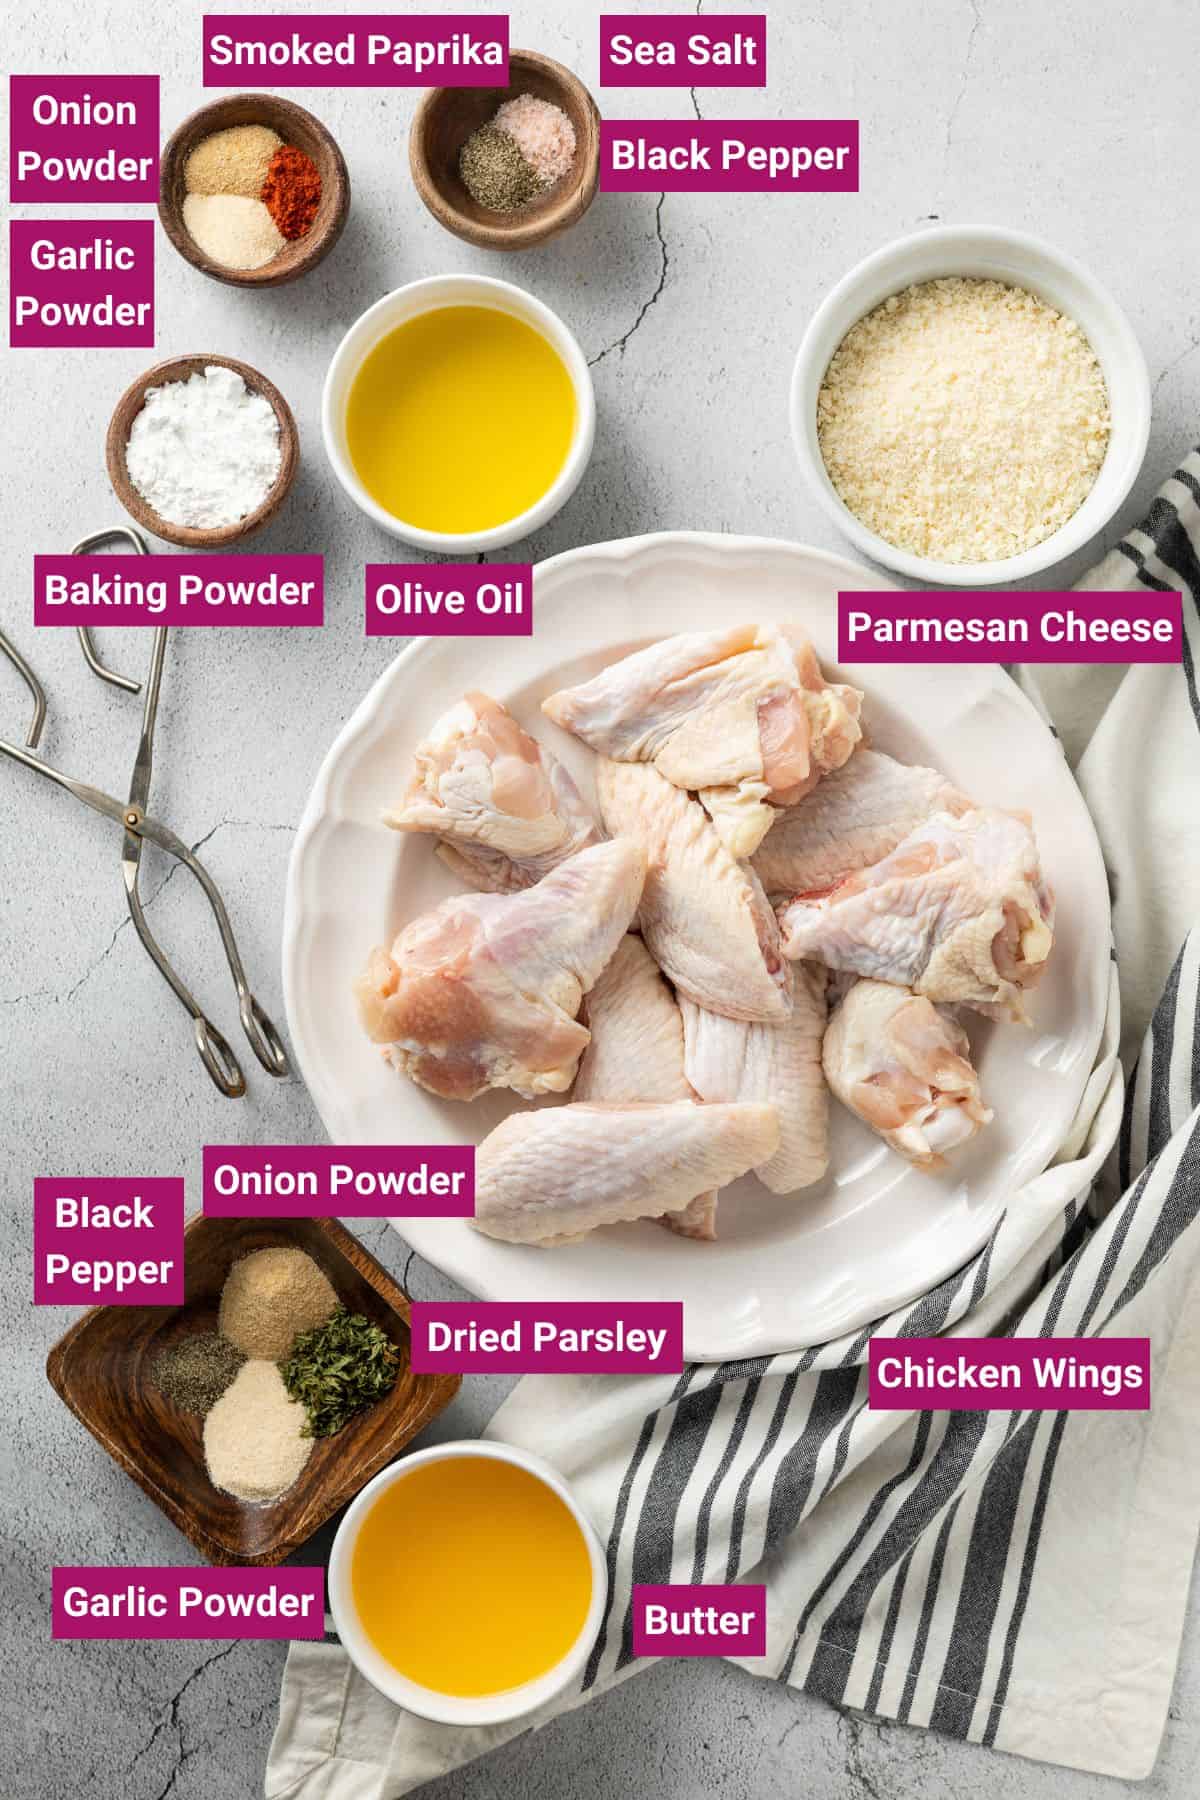 ingredients needed to make baked garlic parmesan wings: Chicken Wings, Sea Salt, Black Pepper, Smoked Paprika, Garlic Powder, Onion Powder, Baking Powder, Olive oil and other spices on separate bowls